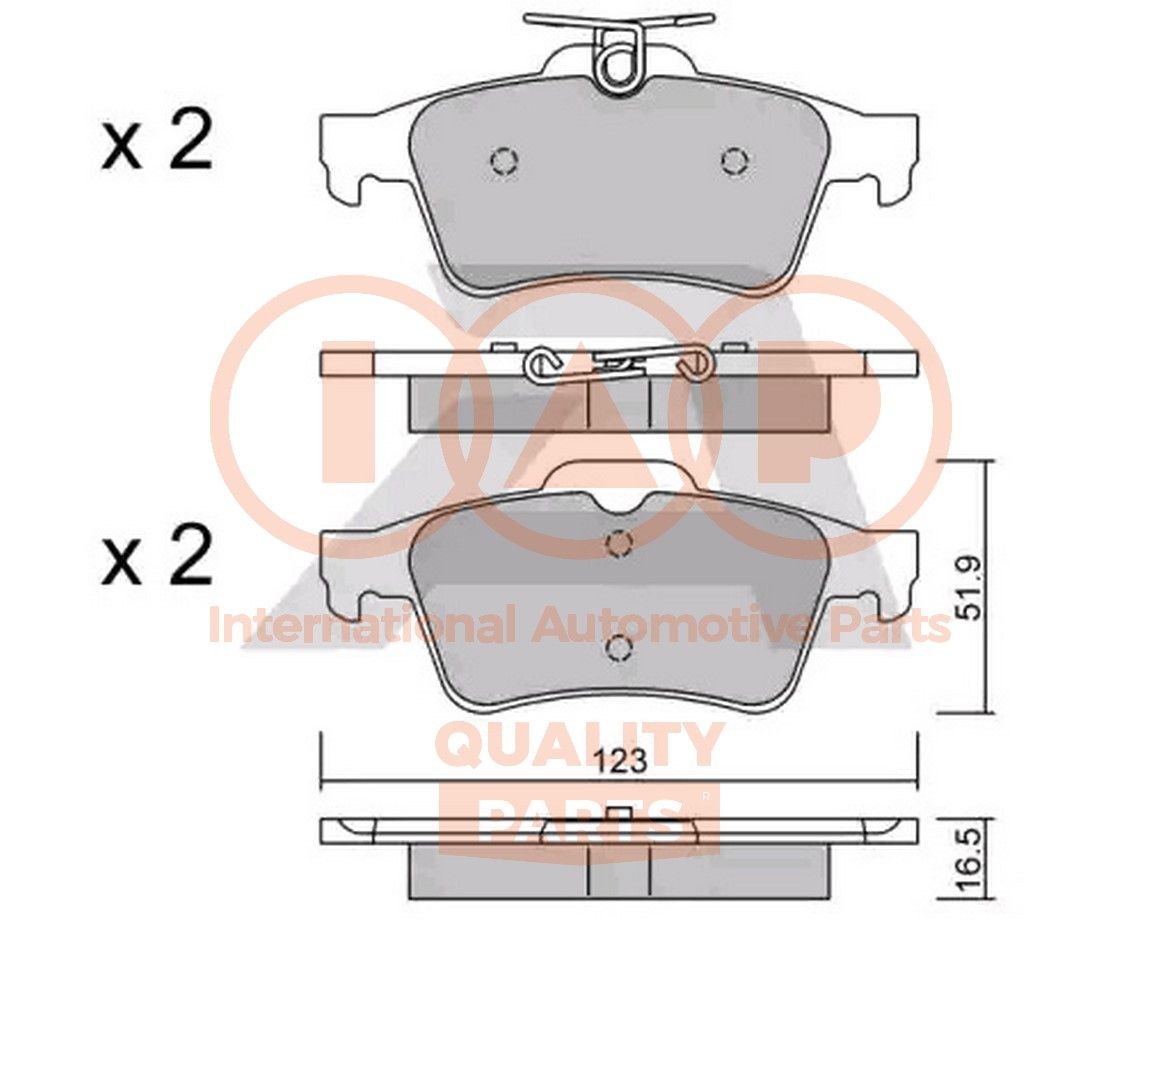 IAP QUALITY PARTS Rear Axle Height 1: 51,9mm, Height 2: 51,9mm, Width 1: 123mm, Width 2 [mm]: 123mm, Thickness 1: 16,5mm, Thickness 2: 16,5mm Brake pads 704-11028P buy